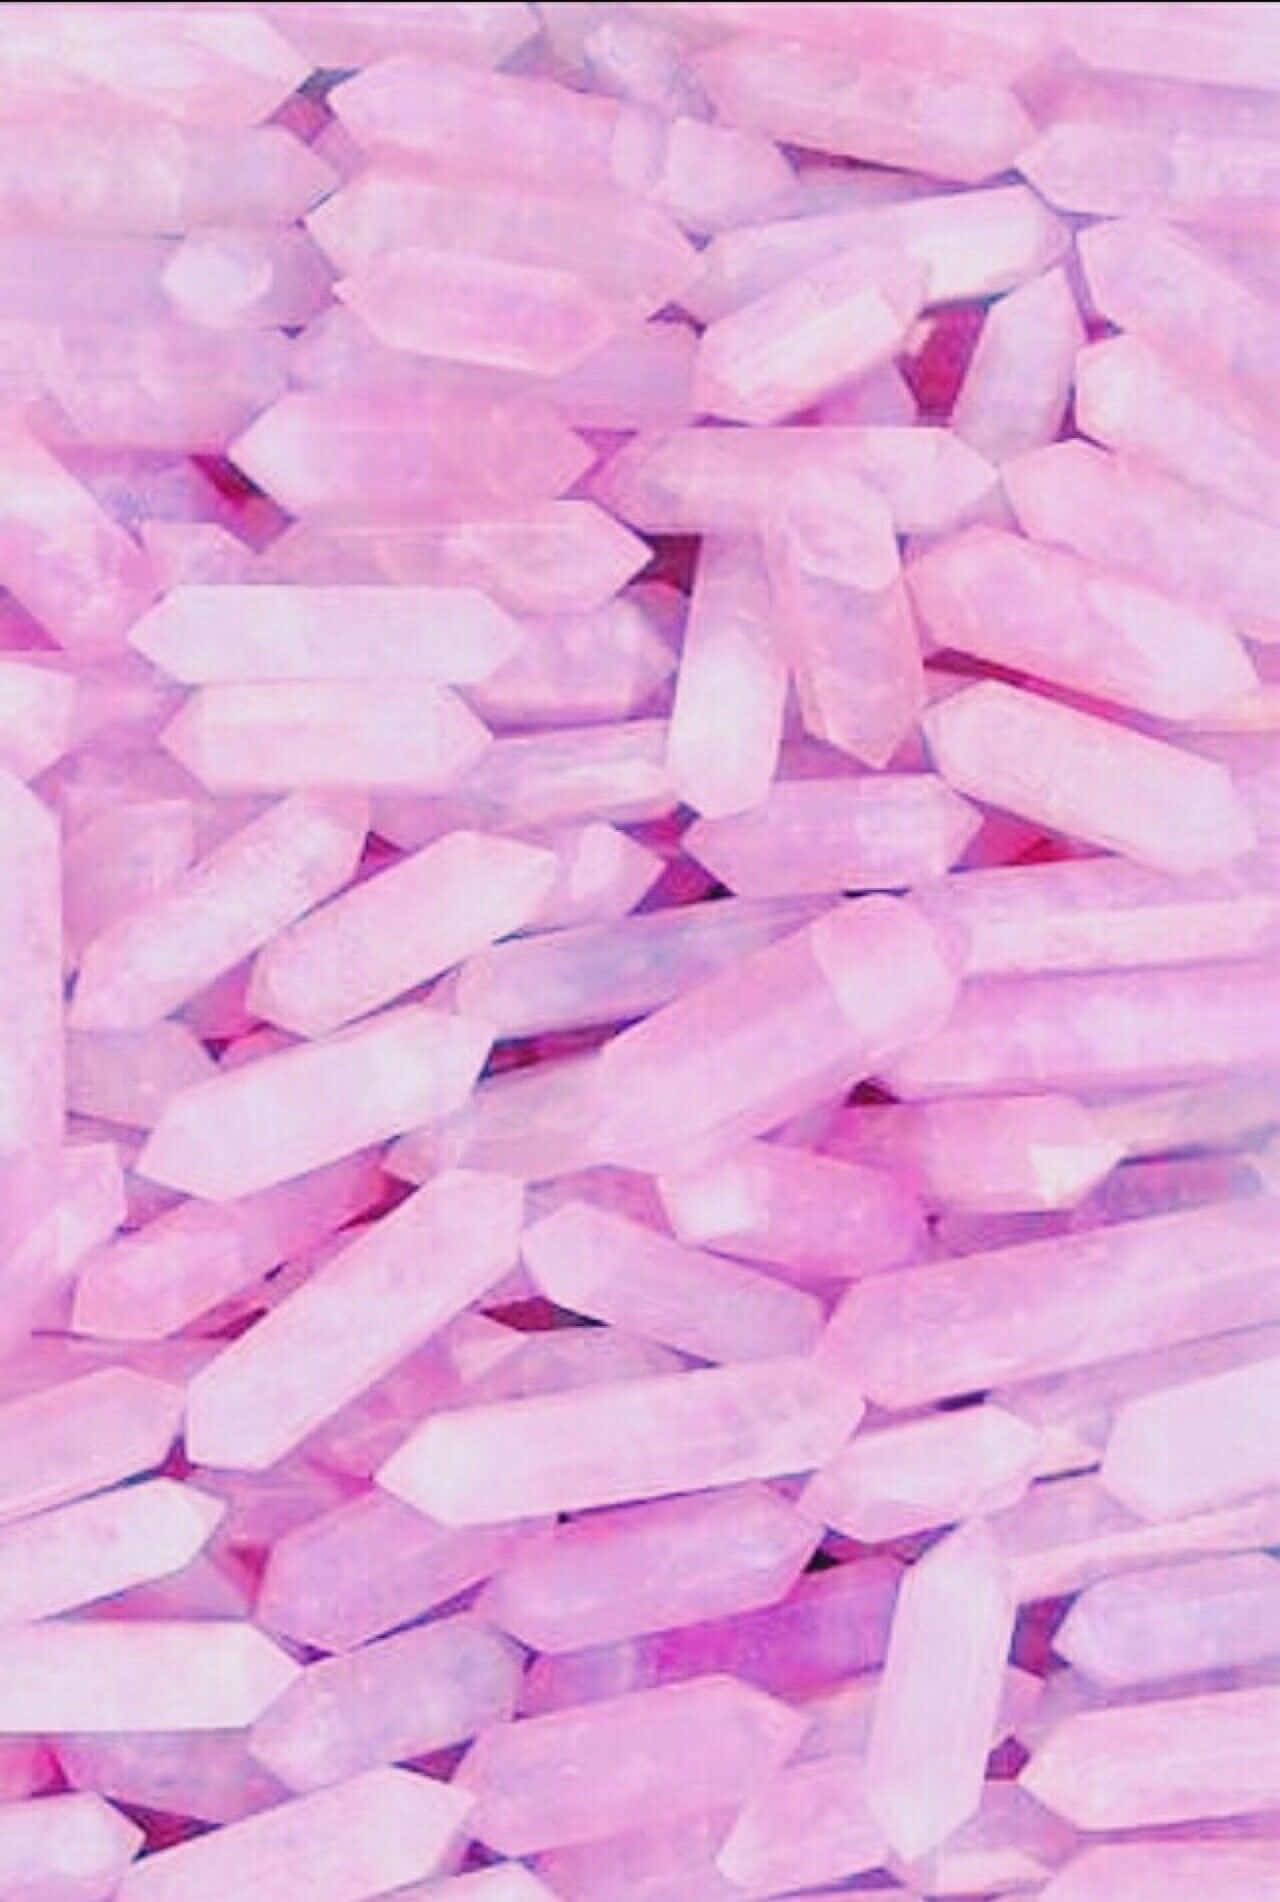 Bright and beautiful healing crystals shining in the morning light. Wallpaper